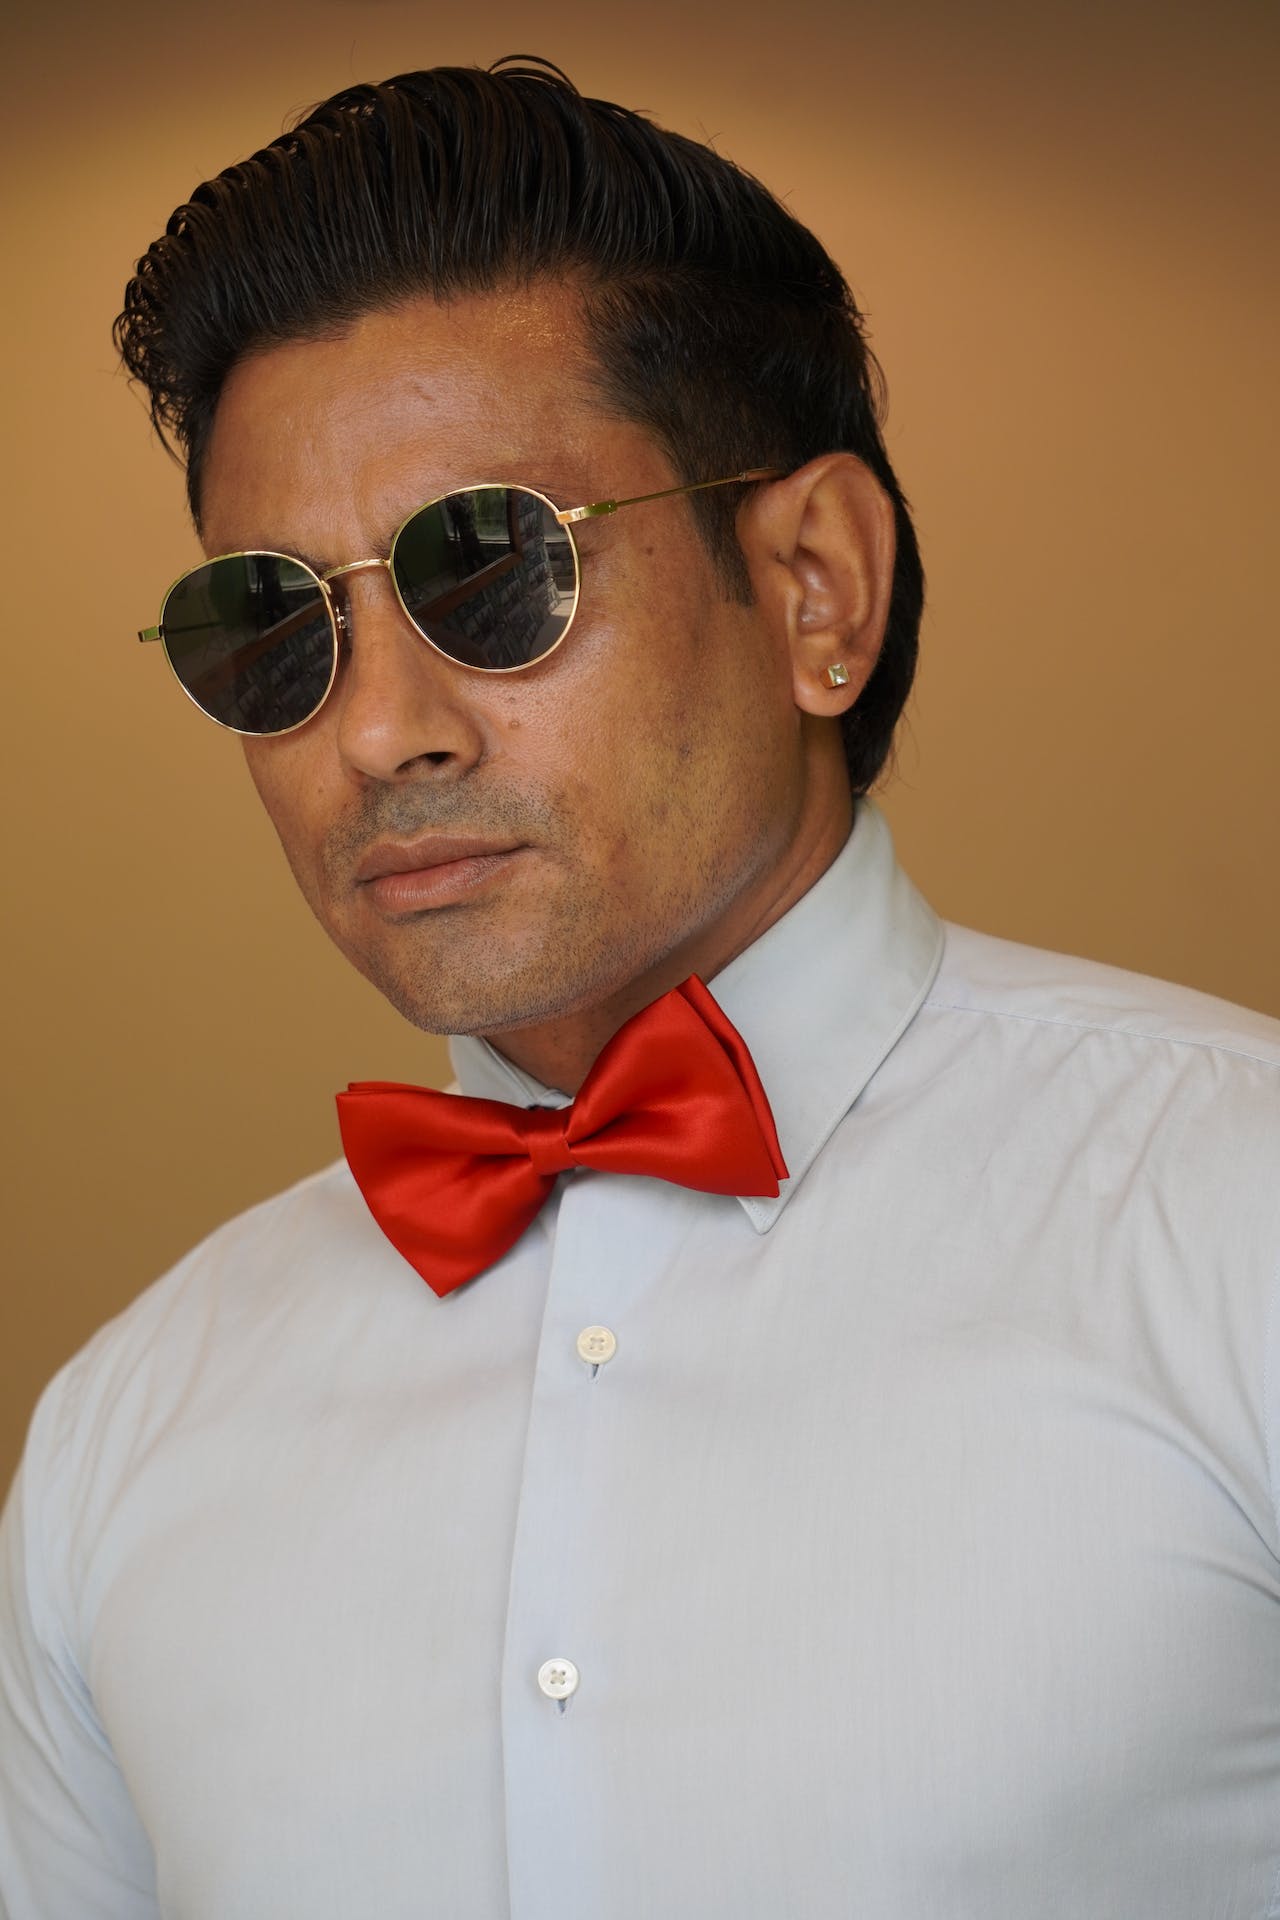 Man in Aviator Sunglasses and Red Bow Tie
